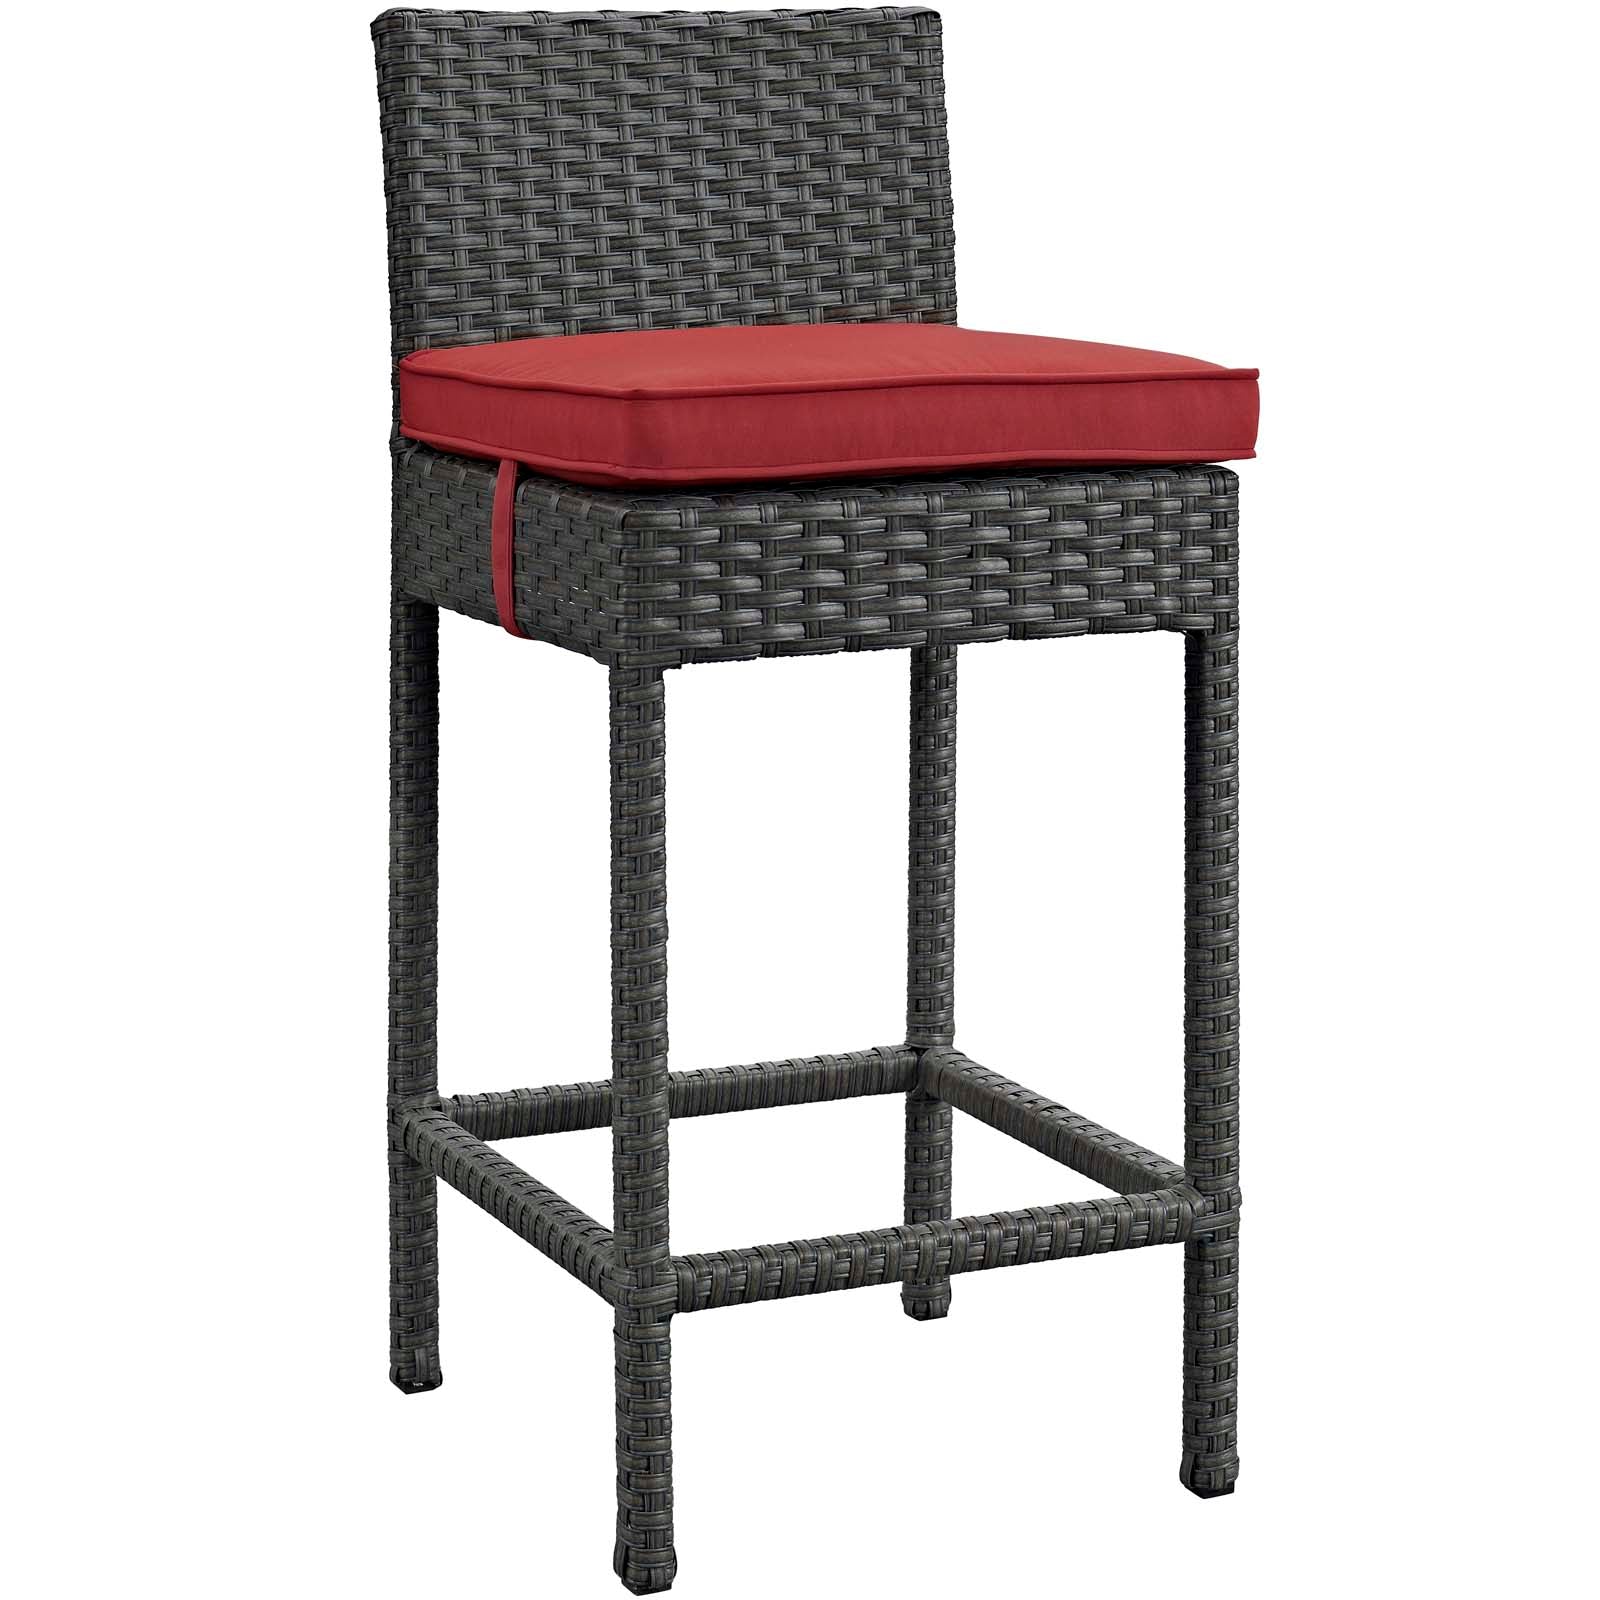 Modway Outdoor Barstools - Sojourn Outdoor Patio Sunbrella Bar Stool Canvas Red